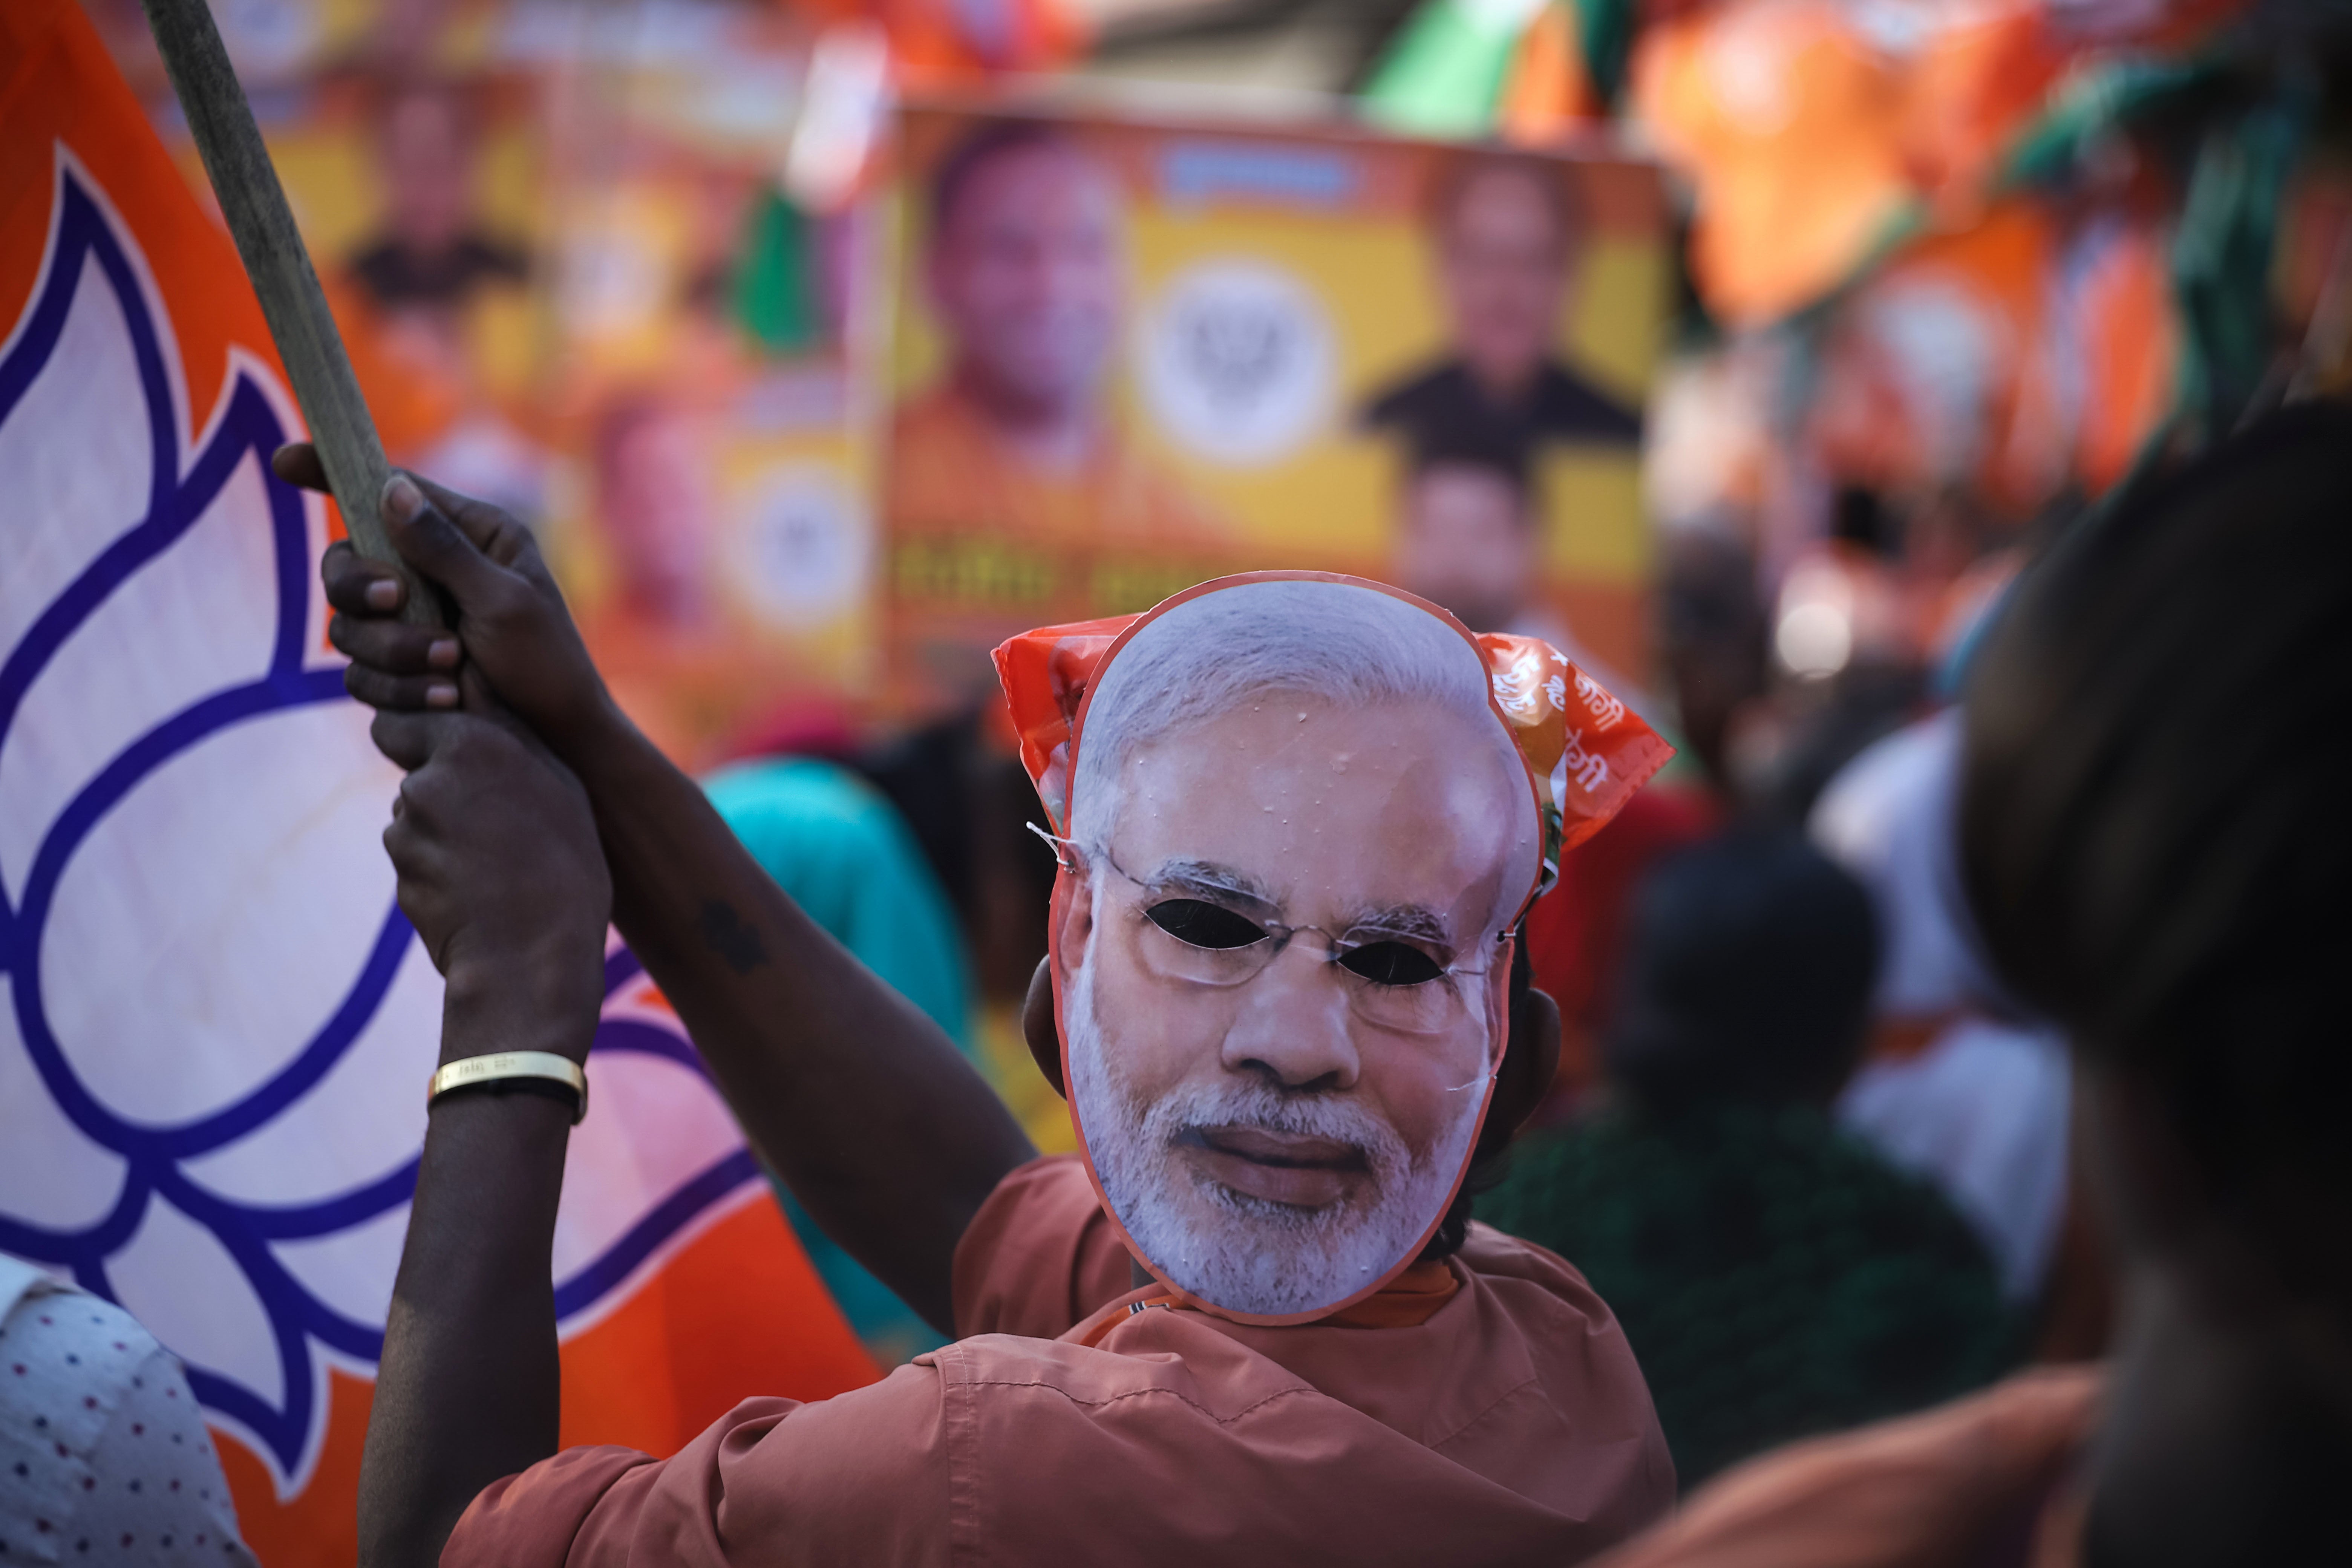 A BJP supporter wears a mask depicting Narendra Modi on the back of his head during a roadshow for Adityanath